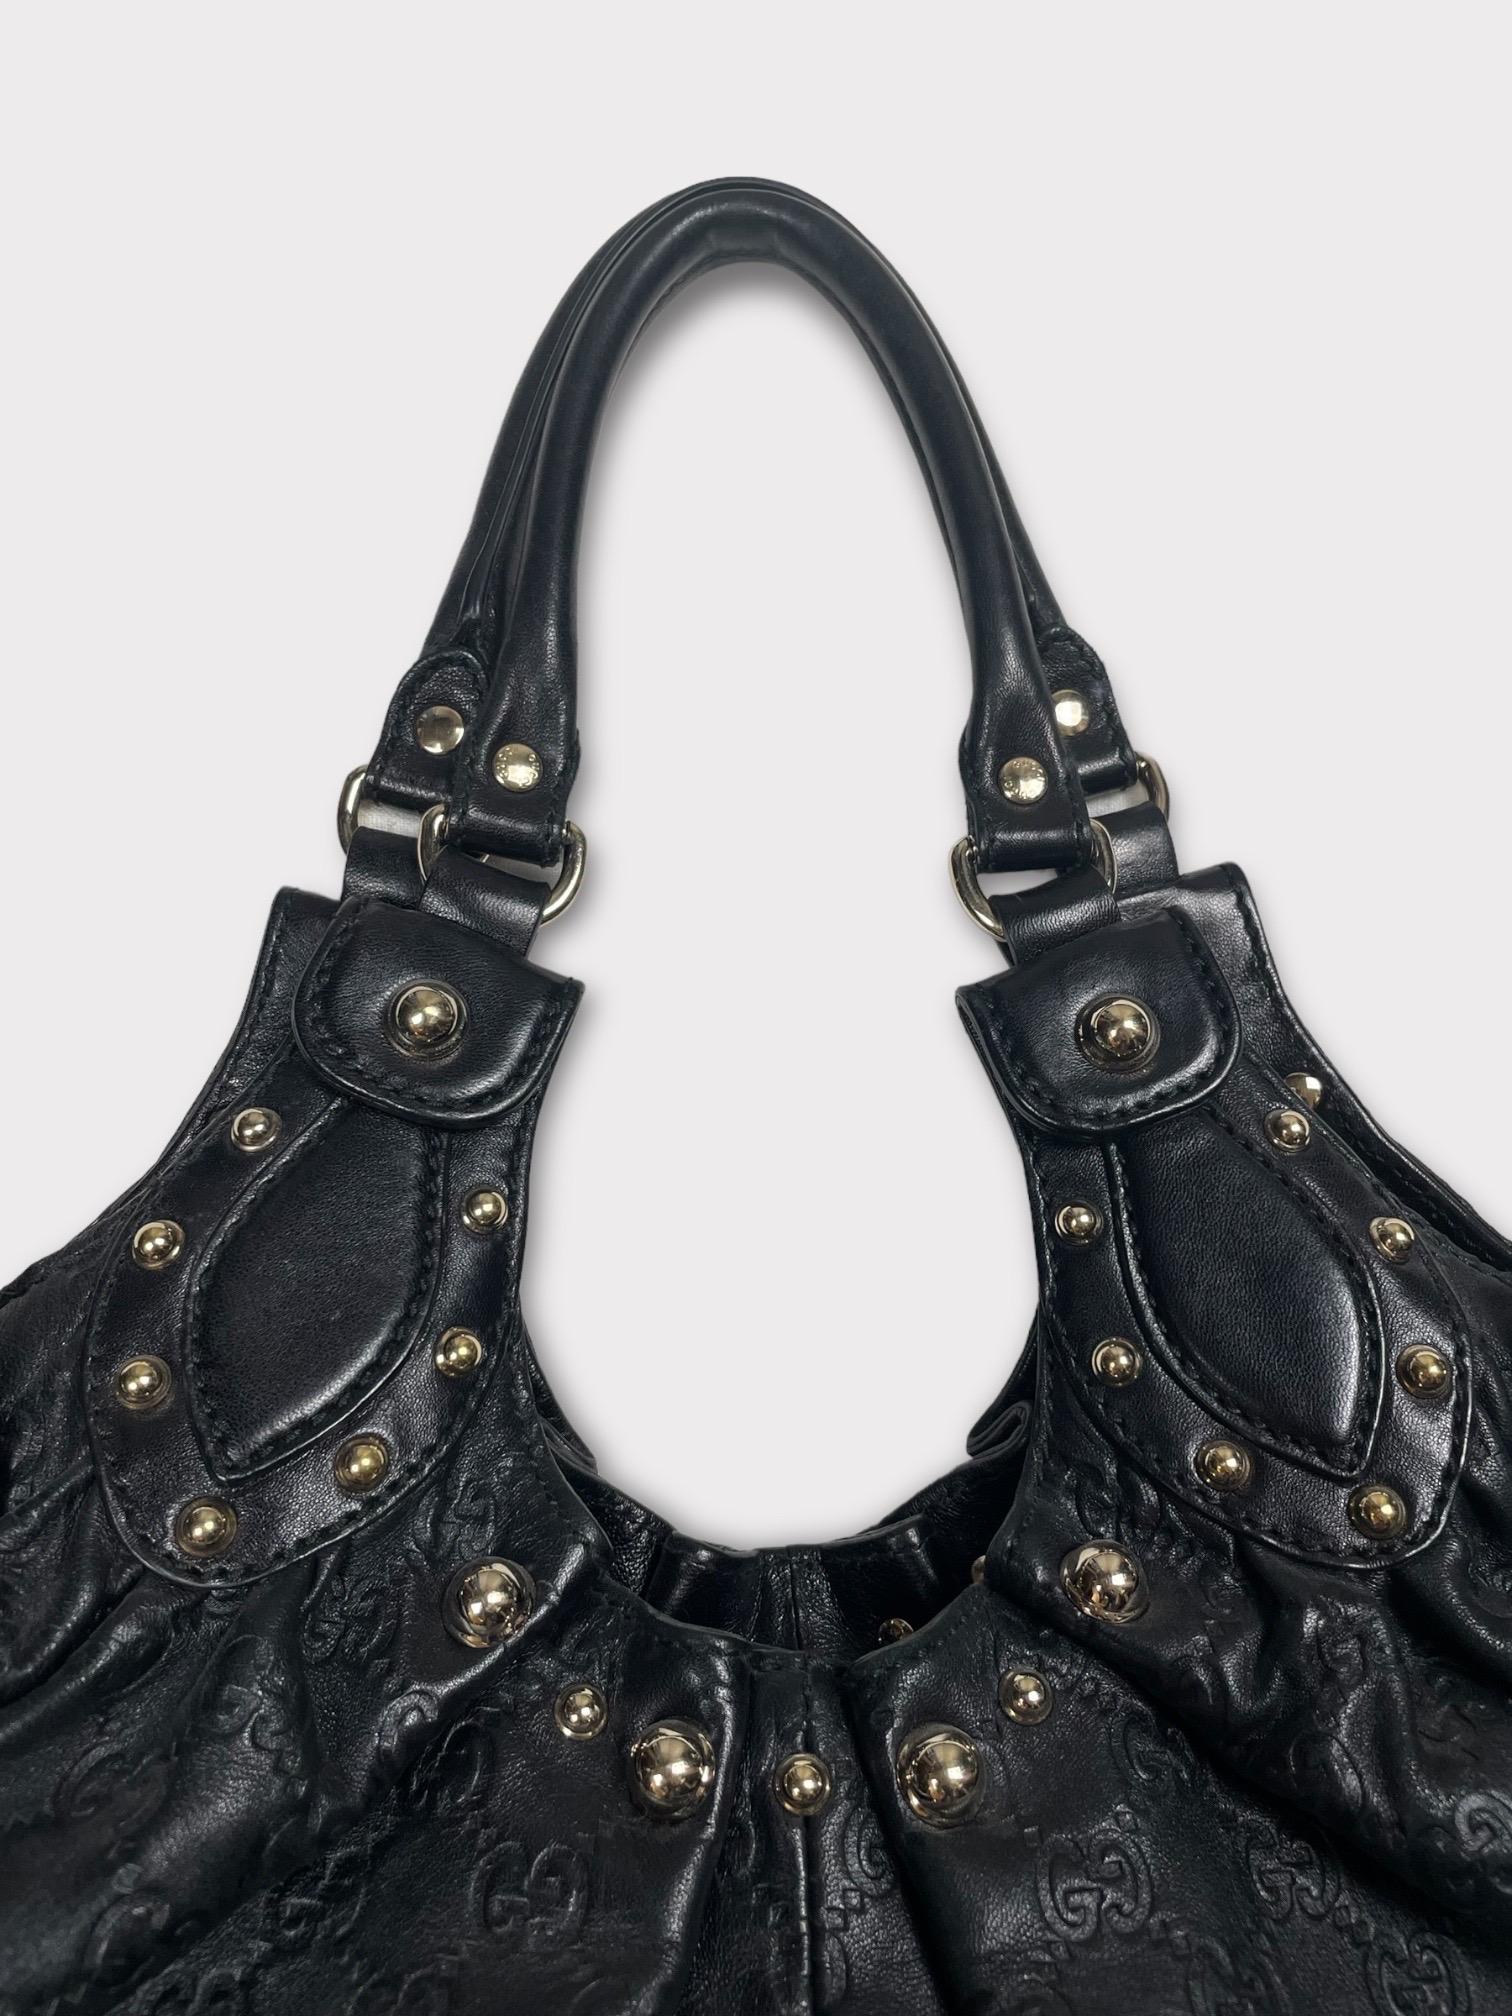 Gucci Studded Pelham Black Tote features a chic design with gorgeous pleated and studded details on gorgeous and supple Gucci monogram embossed leather. 
The bag features studs on the top trim with rolled leather top handles. This opens to a fabric